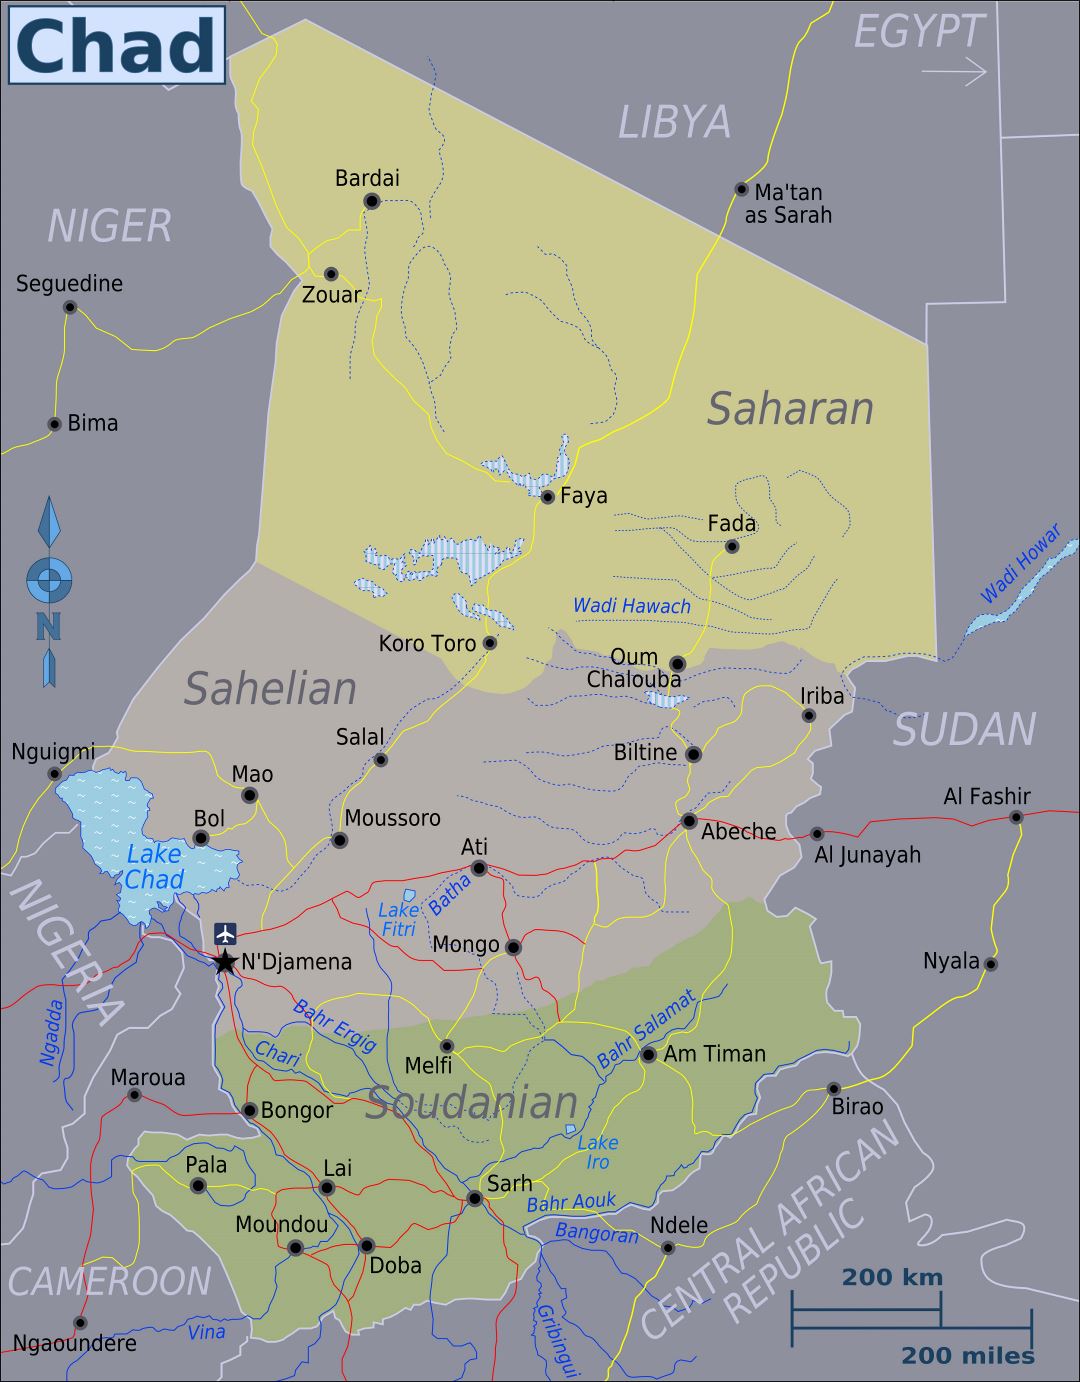 Large regions map of Chad